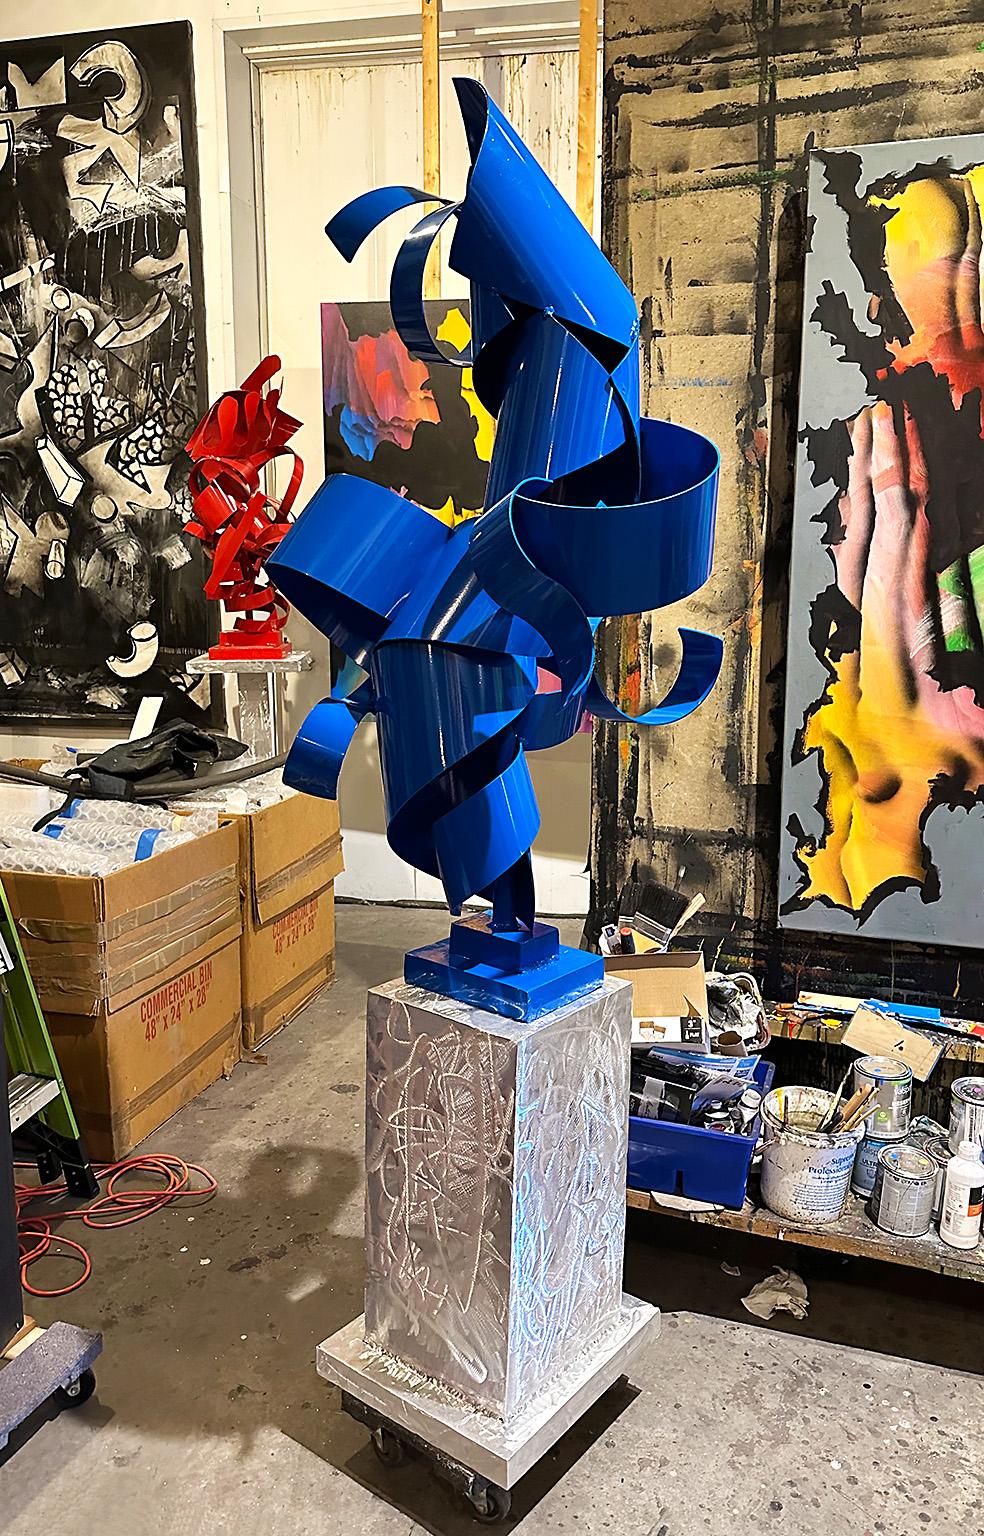 Richard Pitts Abstract Sculpture - "True Blue" Large-Scale, Abstract Aluminum Metal Sculpture in Blue